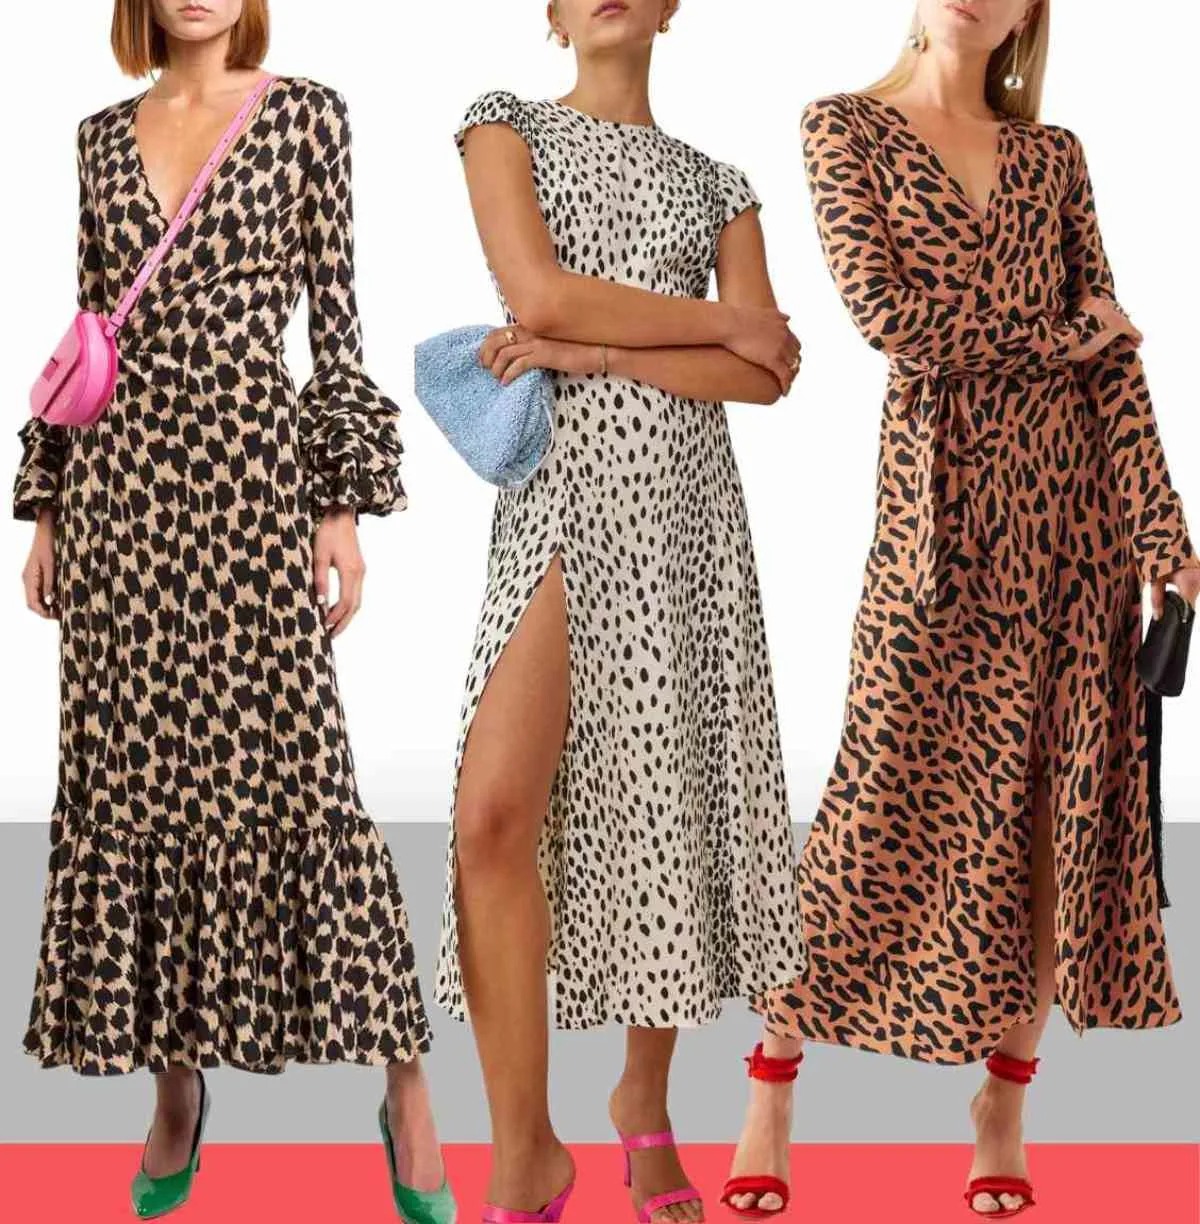 3 women wearing different colorful shoes with leopard print dress outfits.